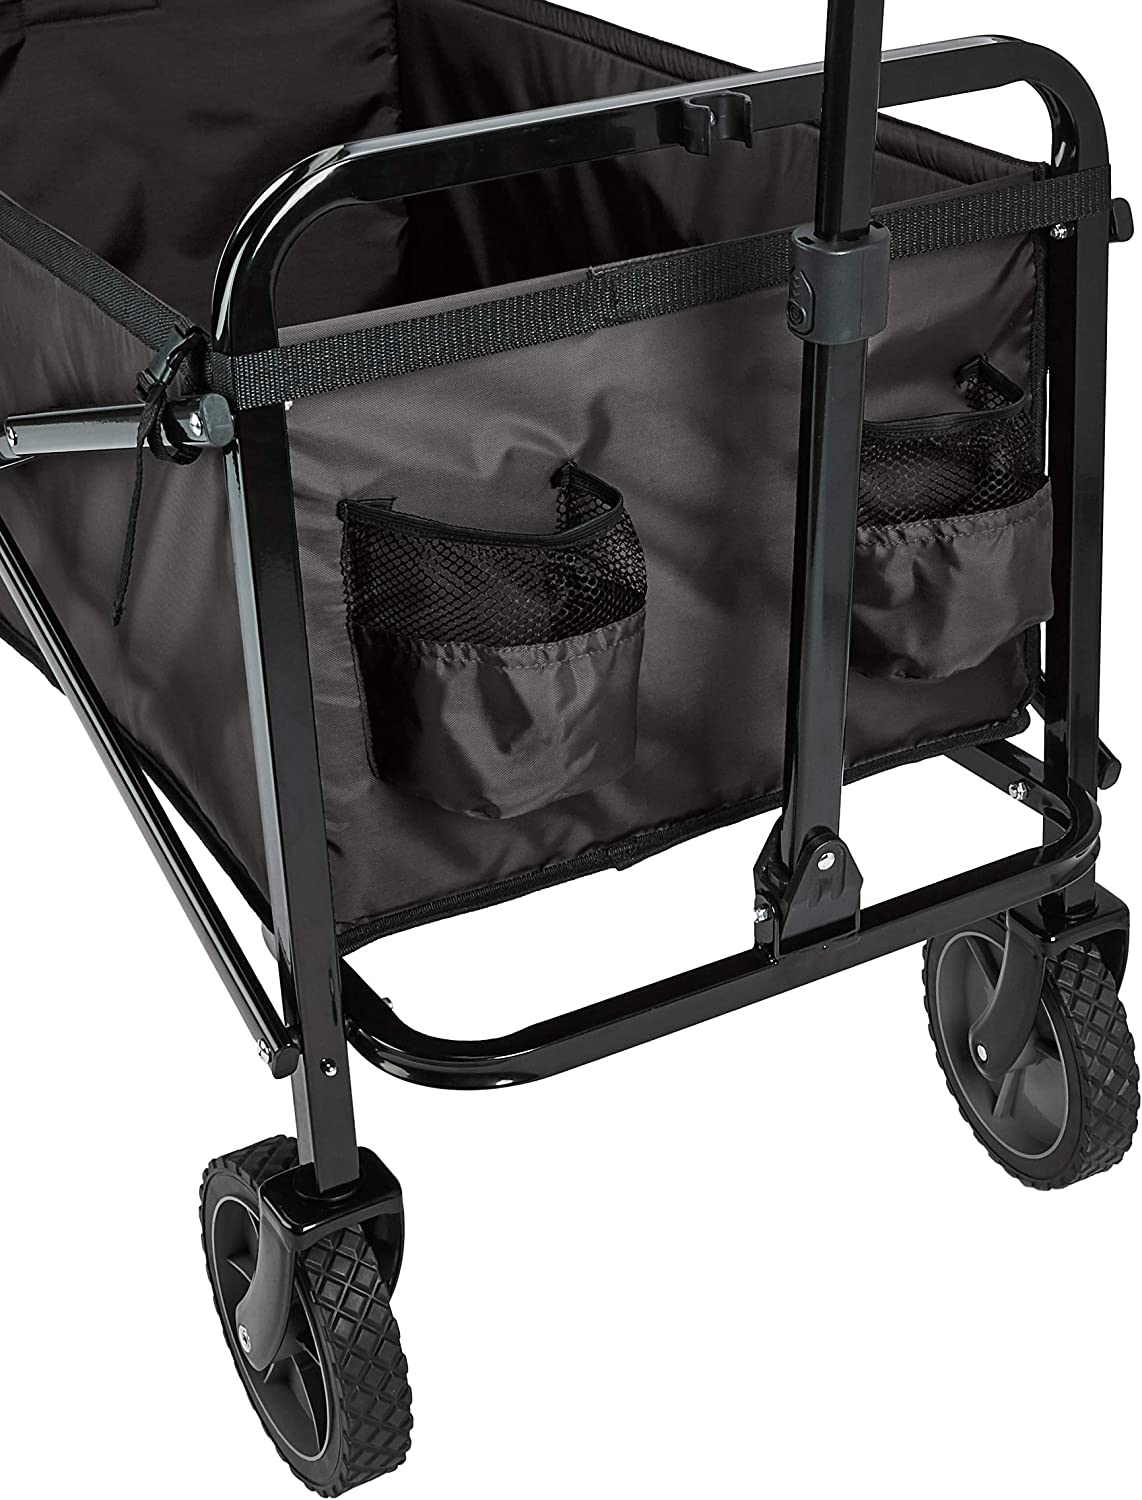 Collapsible Folding Outdoor Utility Wagon with Cover Bag, Black